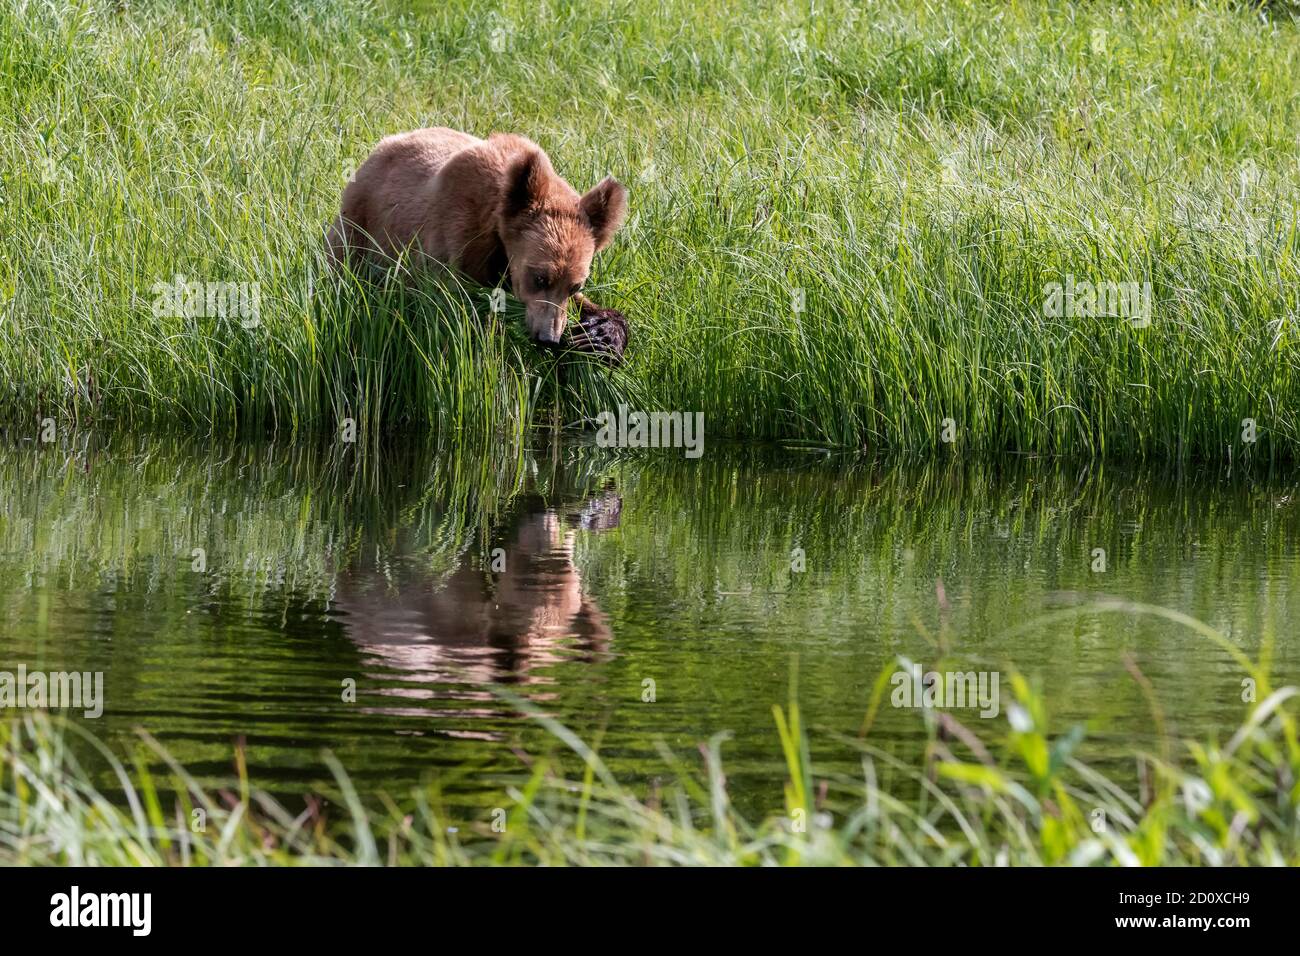 Grizzly cub by the water clawing grass into its mouth, with reflections, Khutzeymateen, BC Stock Photo